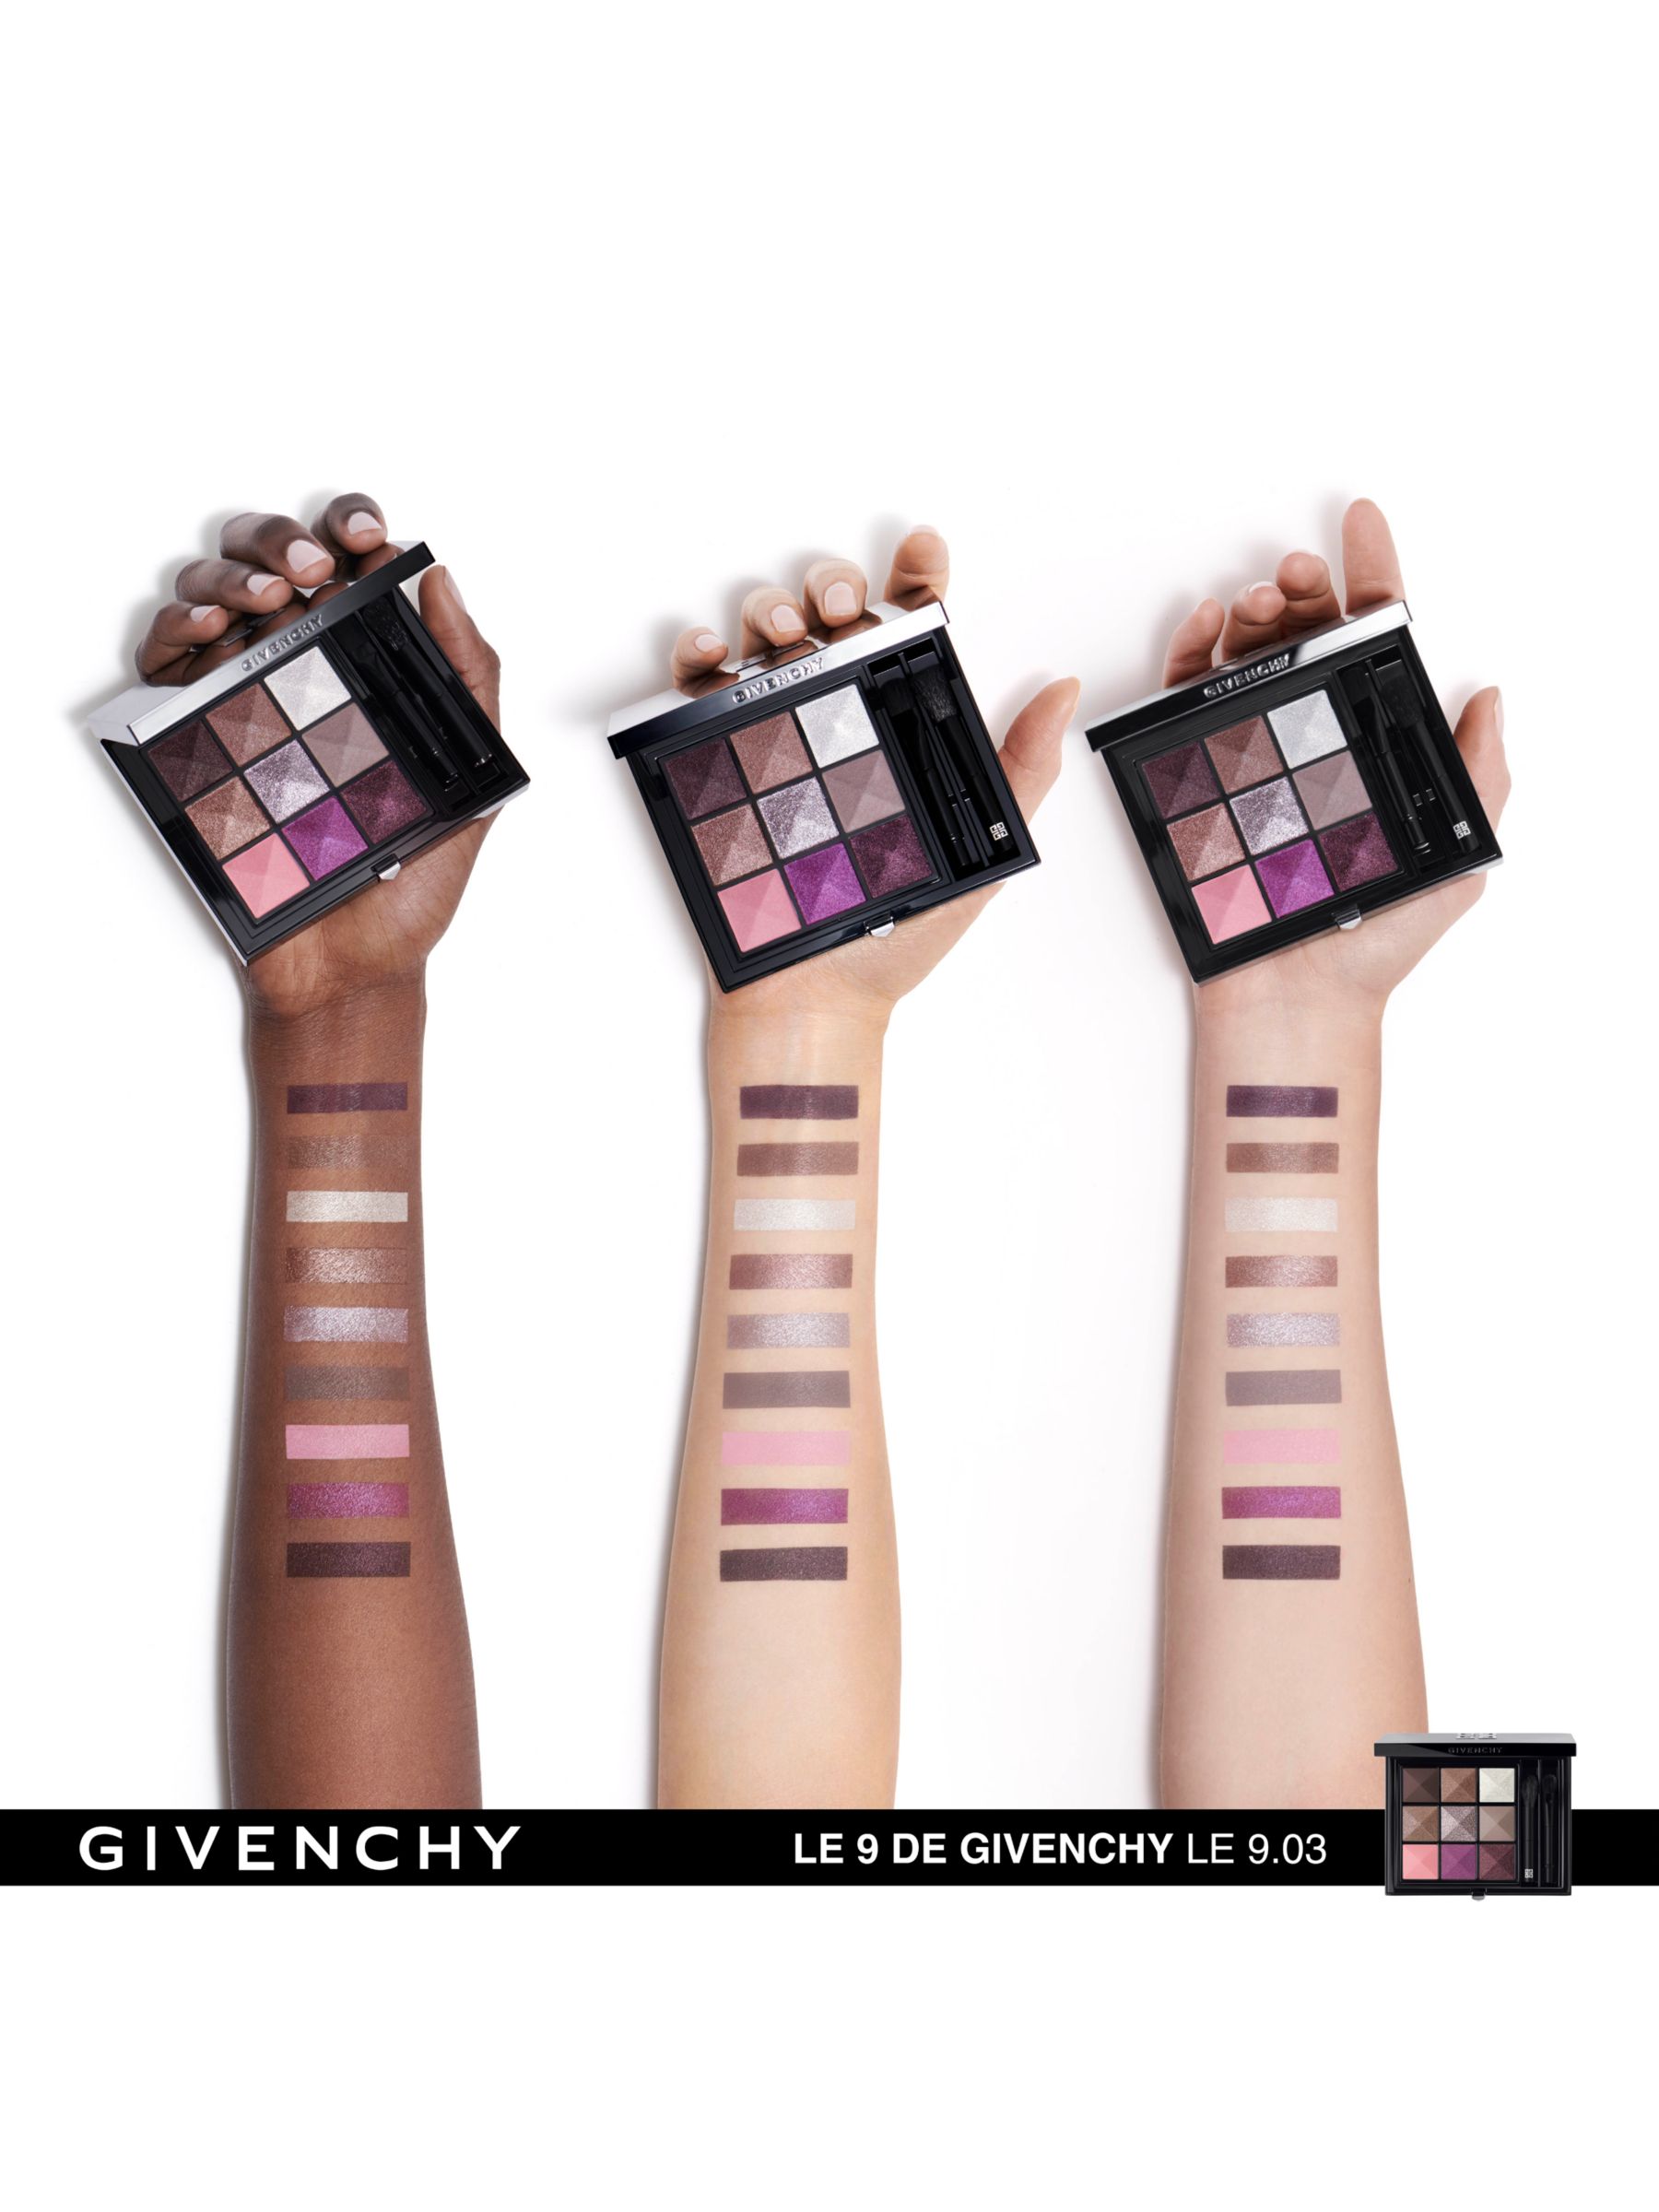 Givenchy Le 9 de Givenchy Multi-Finish Eyeshadow Palette, 9.03 2